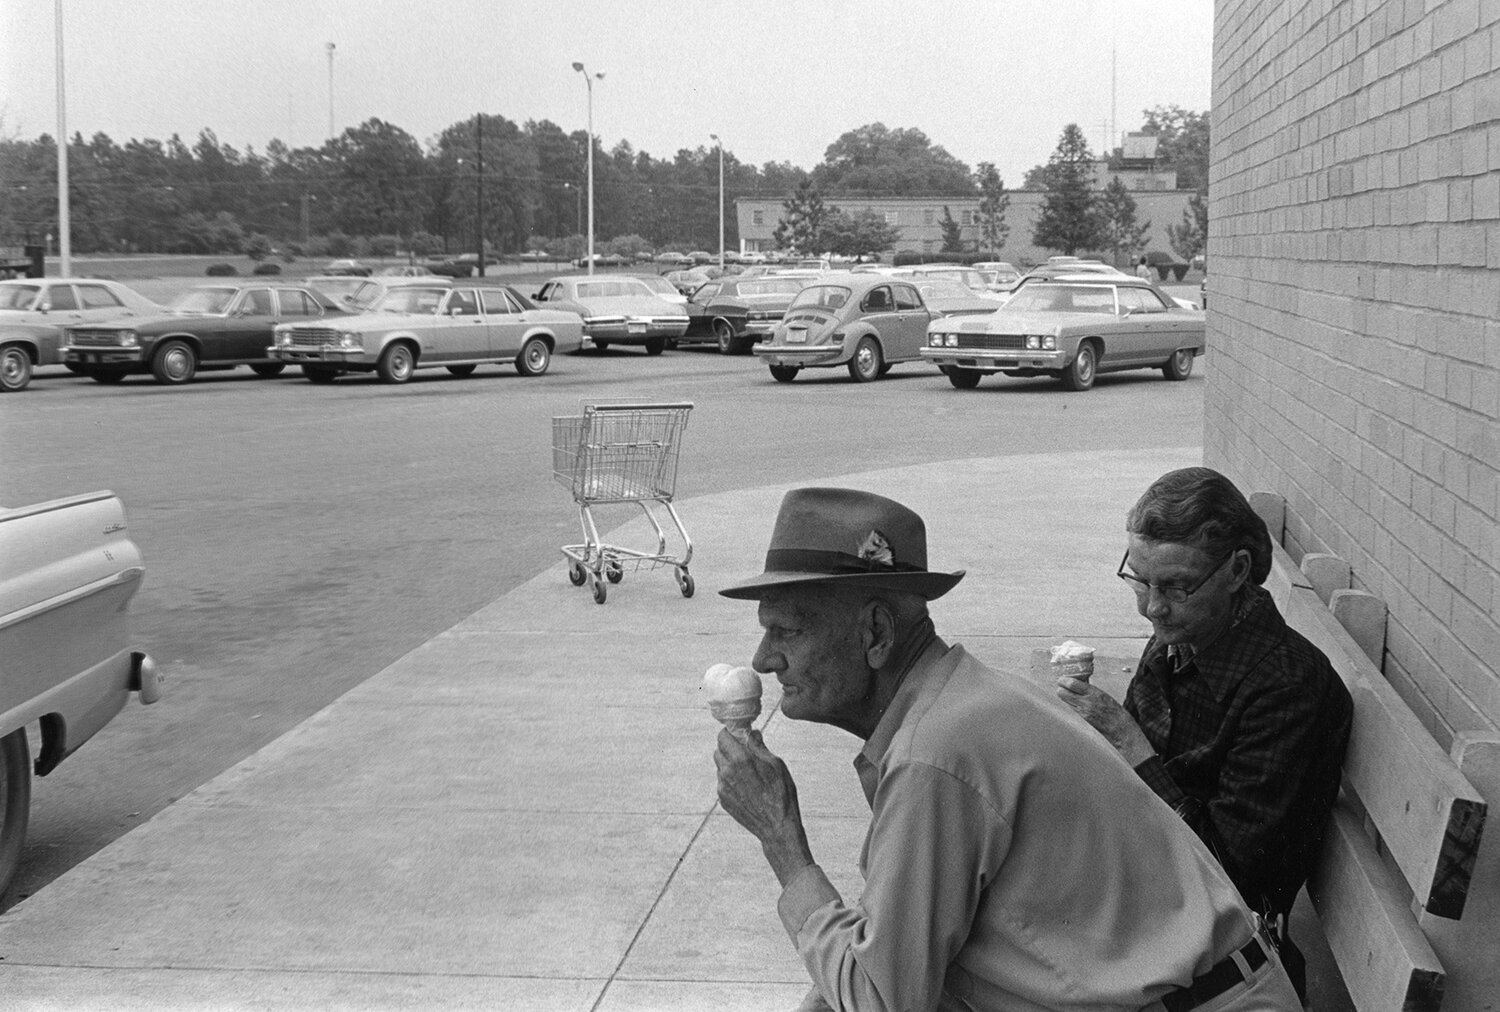   Man and wife at Bainbridge Mall , 1976 Silver Gelatin Print 6 1⁄2 x 9 1⁄4 in. (image size) The Do Good Fund, Inc., 2017-76 